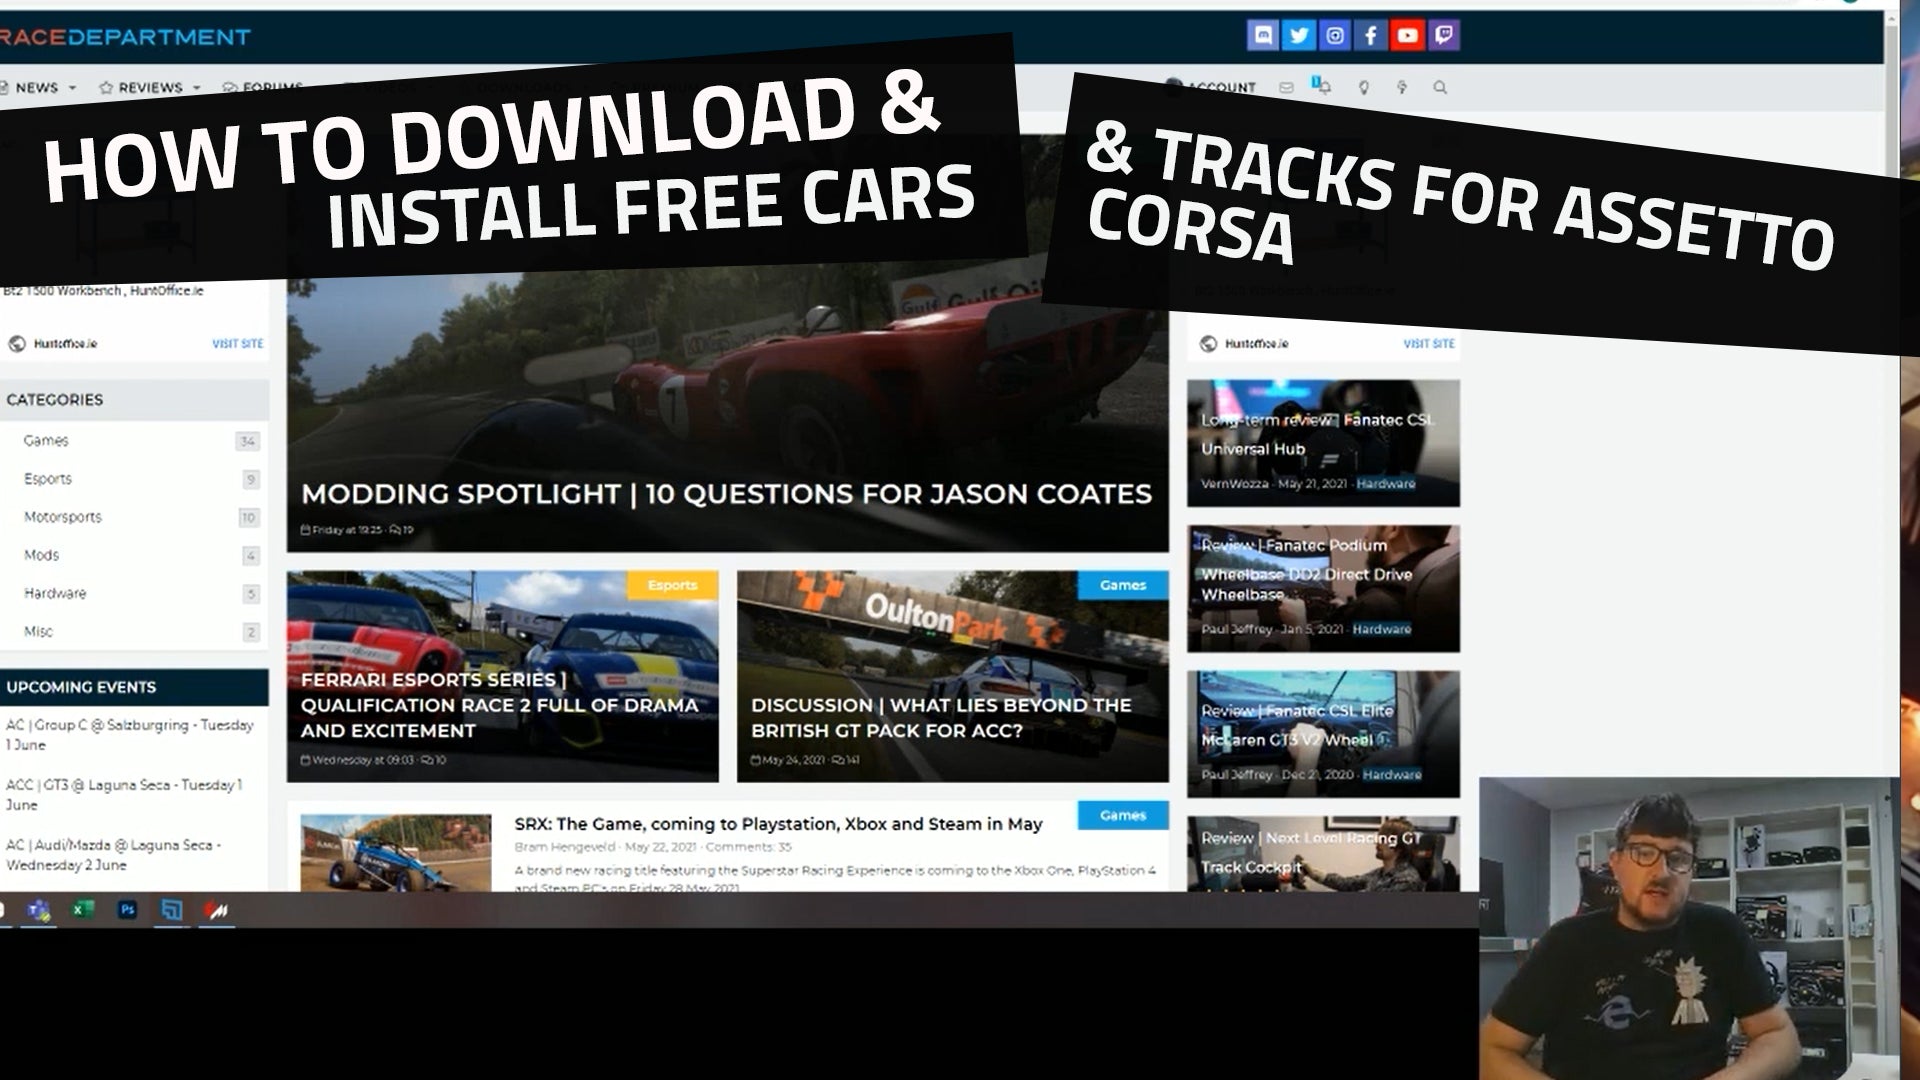 Upload custom cars and tracks using Content Manager (full version